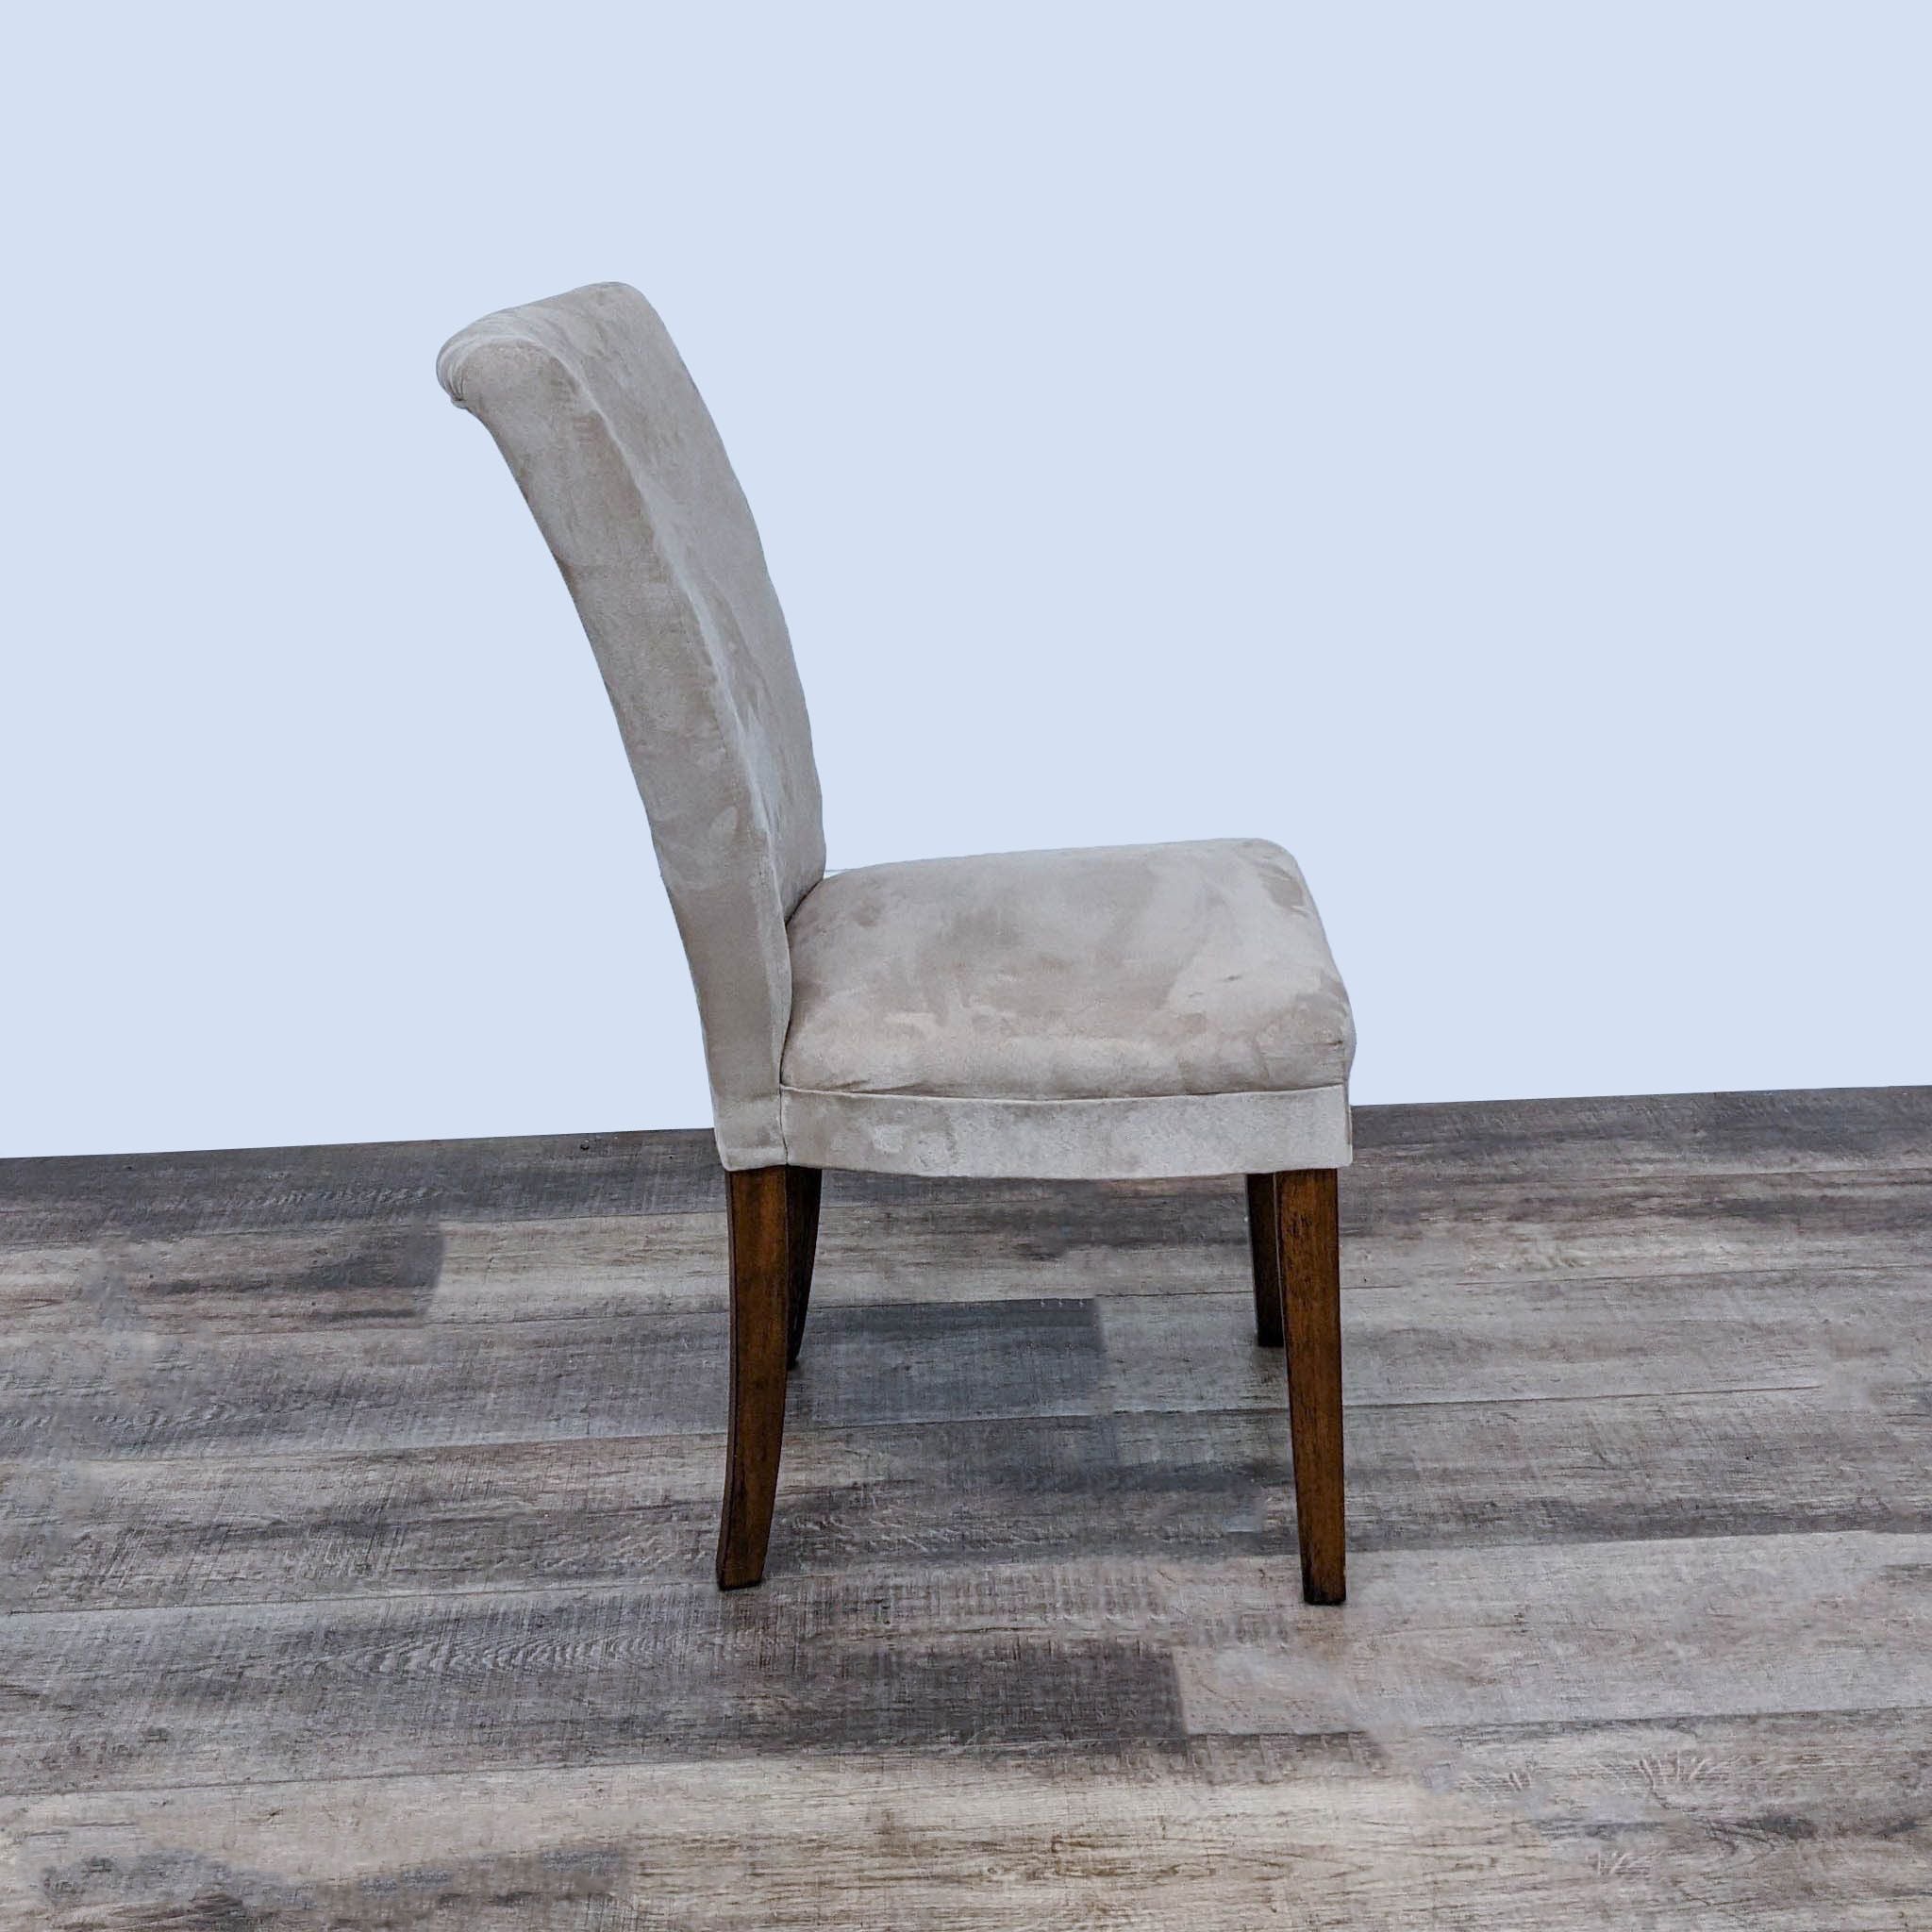 Side view of Reperch Parsons style chair in faux suede upholstery with wood legs against a wooden floor.